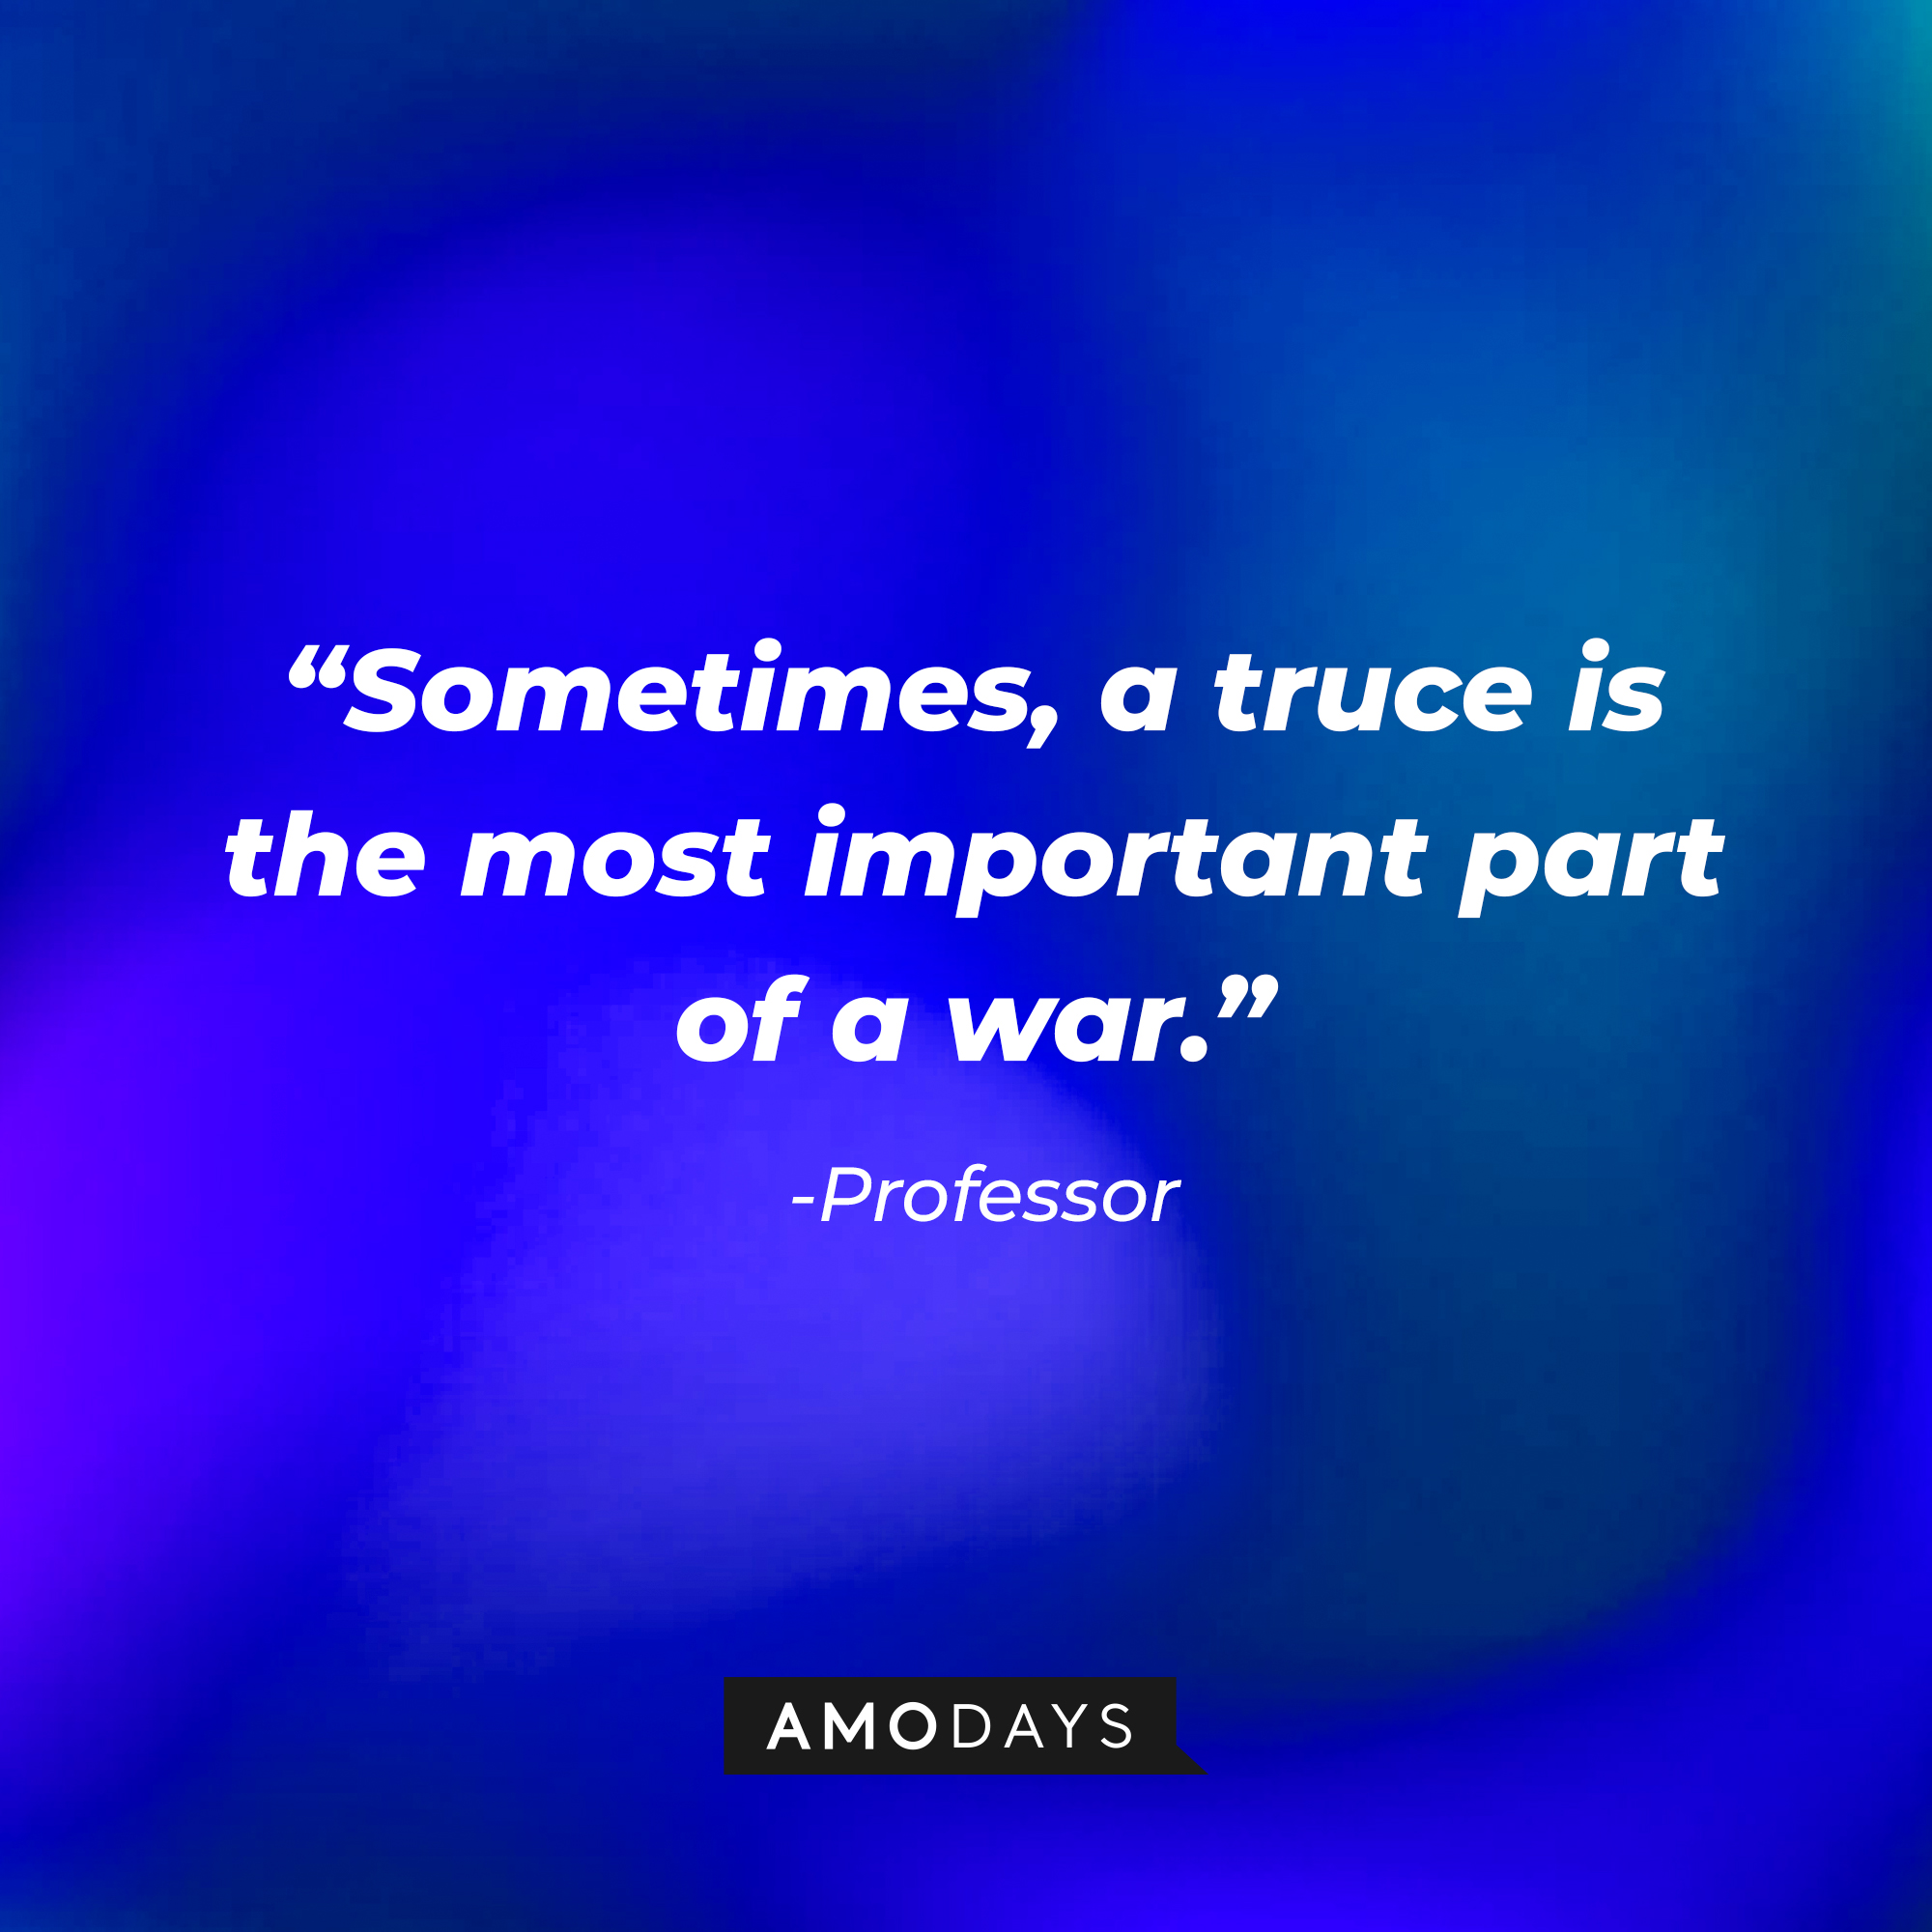 Professor’s  quote: "Sometimes, a truce is the most important part of a war.” | Source: AmoDays